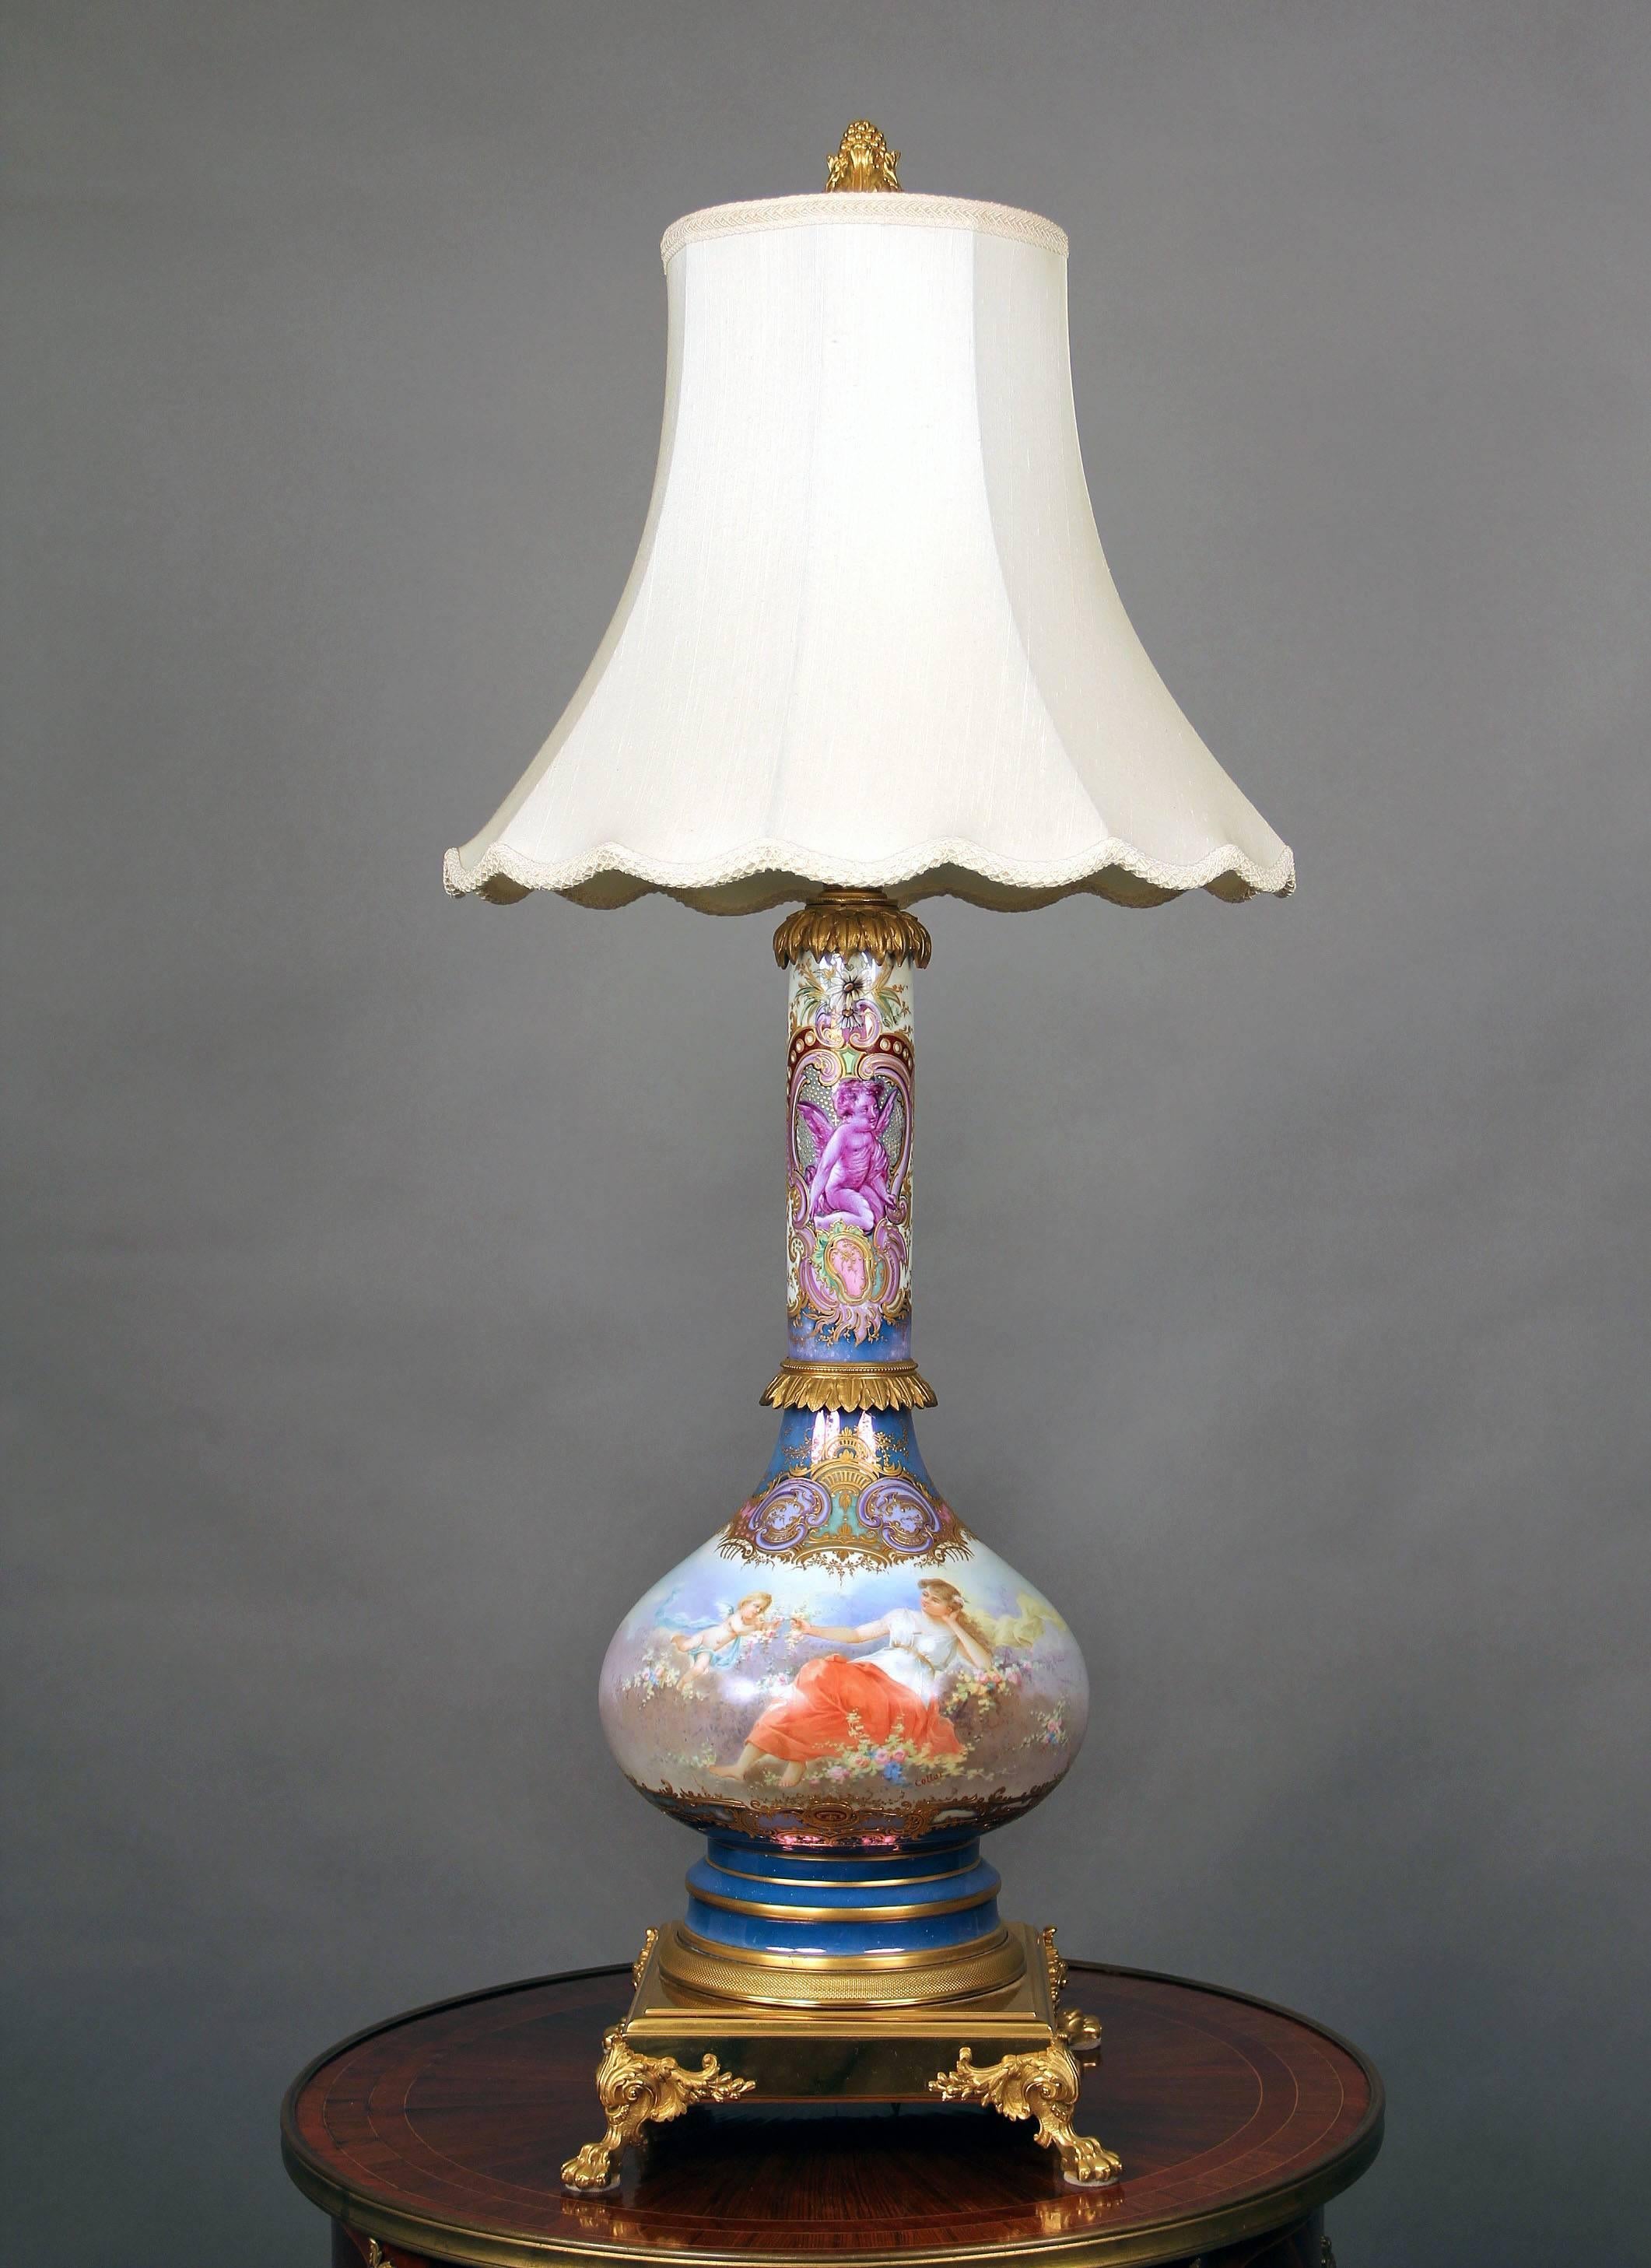 Beautiful Late 19th Century Gilt Bronze-Mounted Sèvres Style Porcelain Lamp In Good Condition For Sale In New York, NY